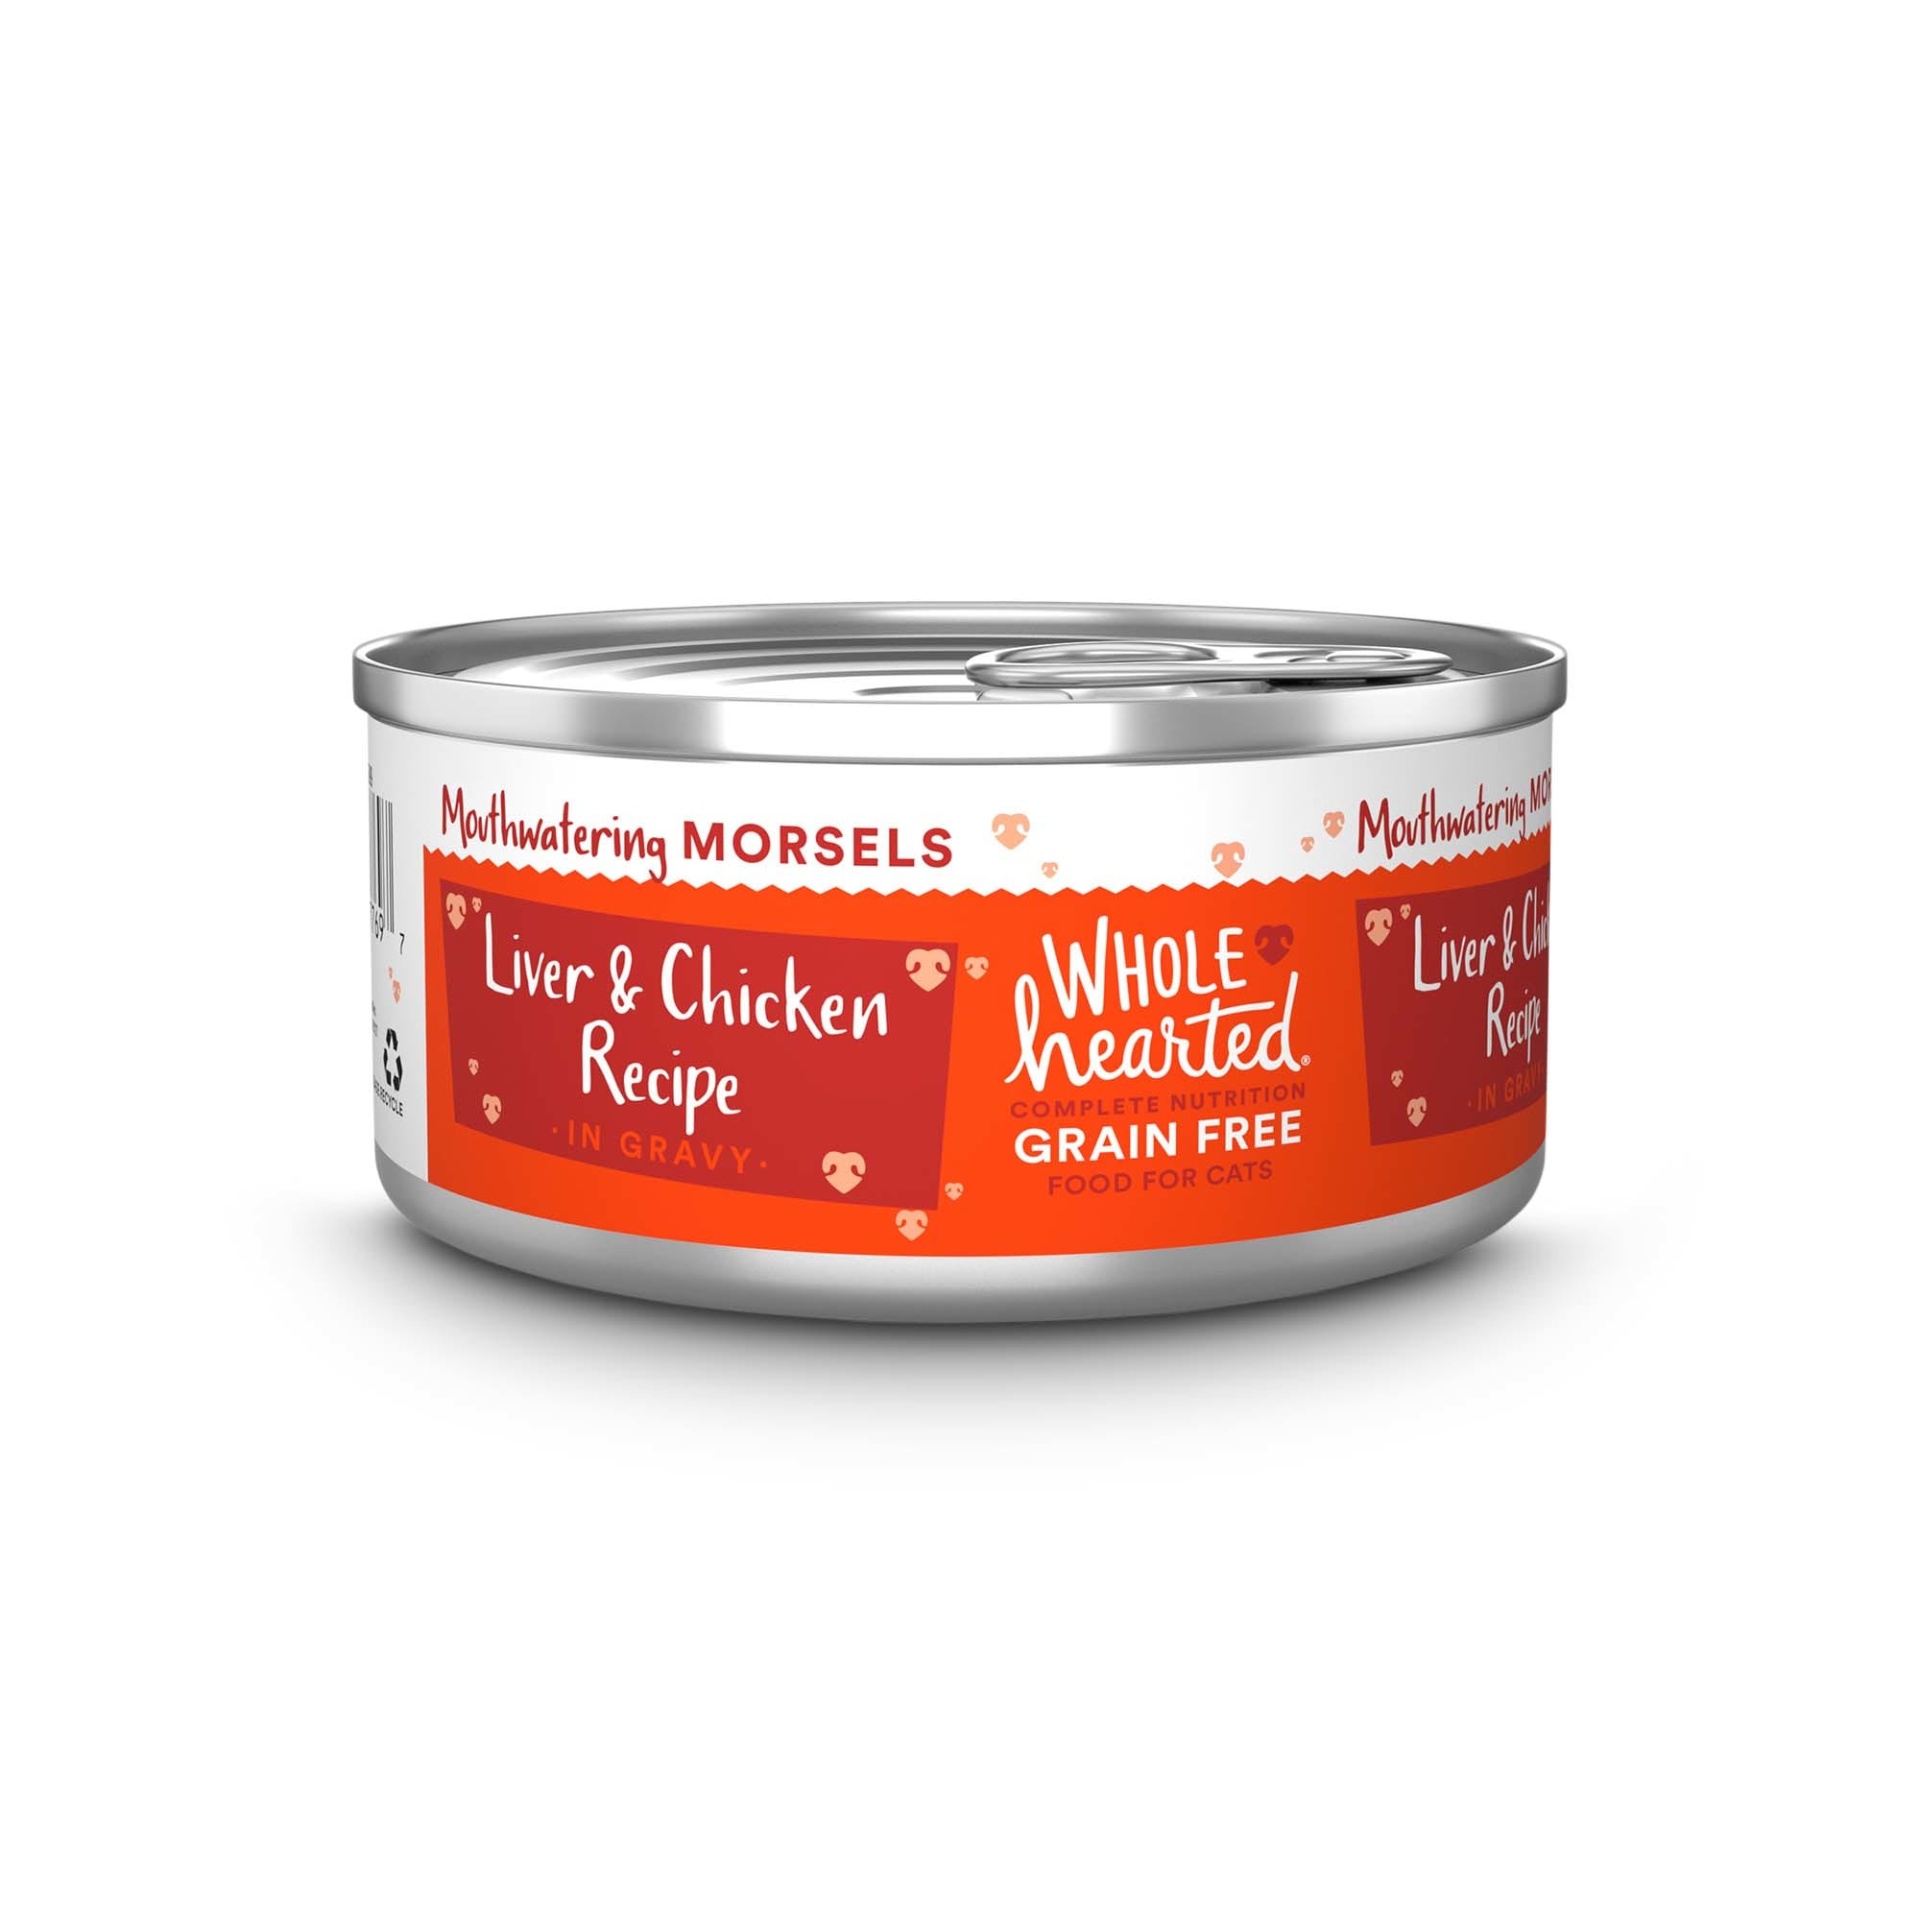 slide 1 of 1, Whd-Cat 5.5Z Chkn&Liver Morsel, 1 ct